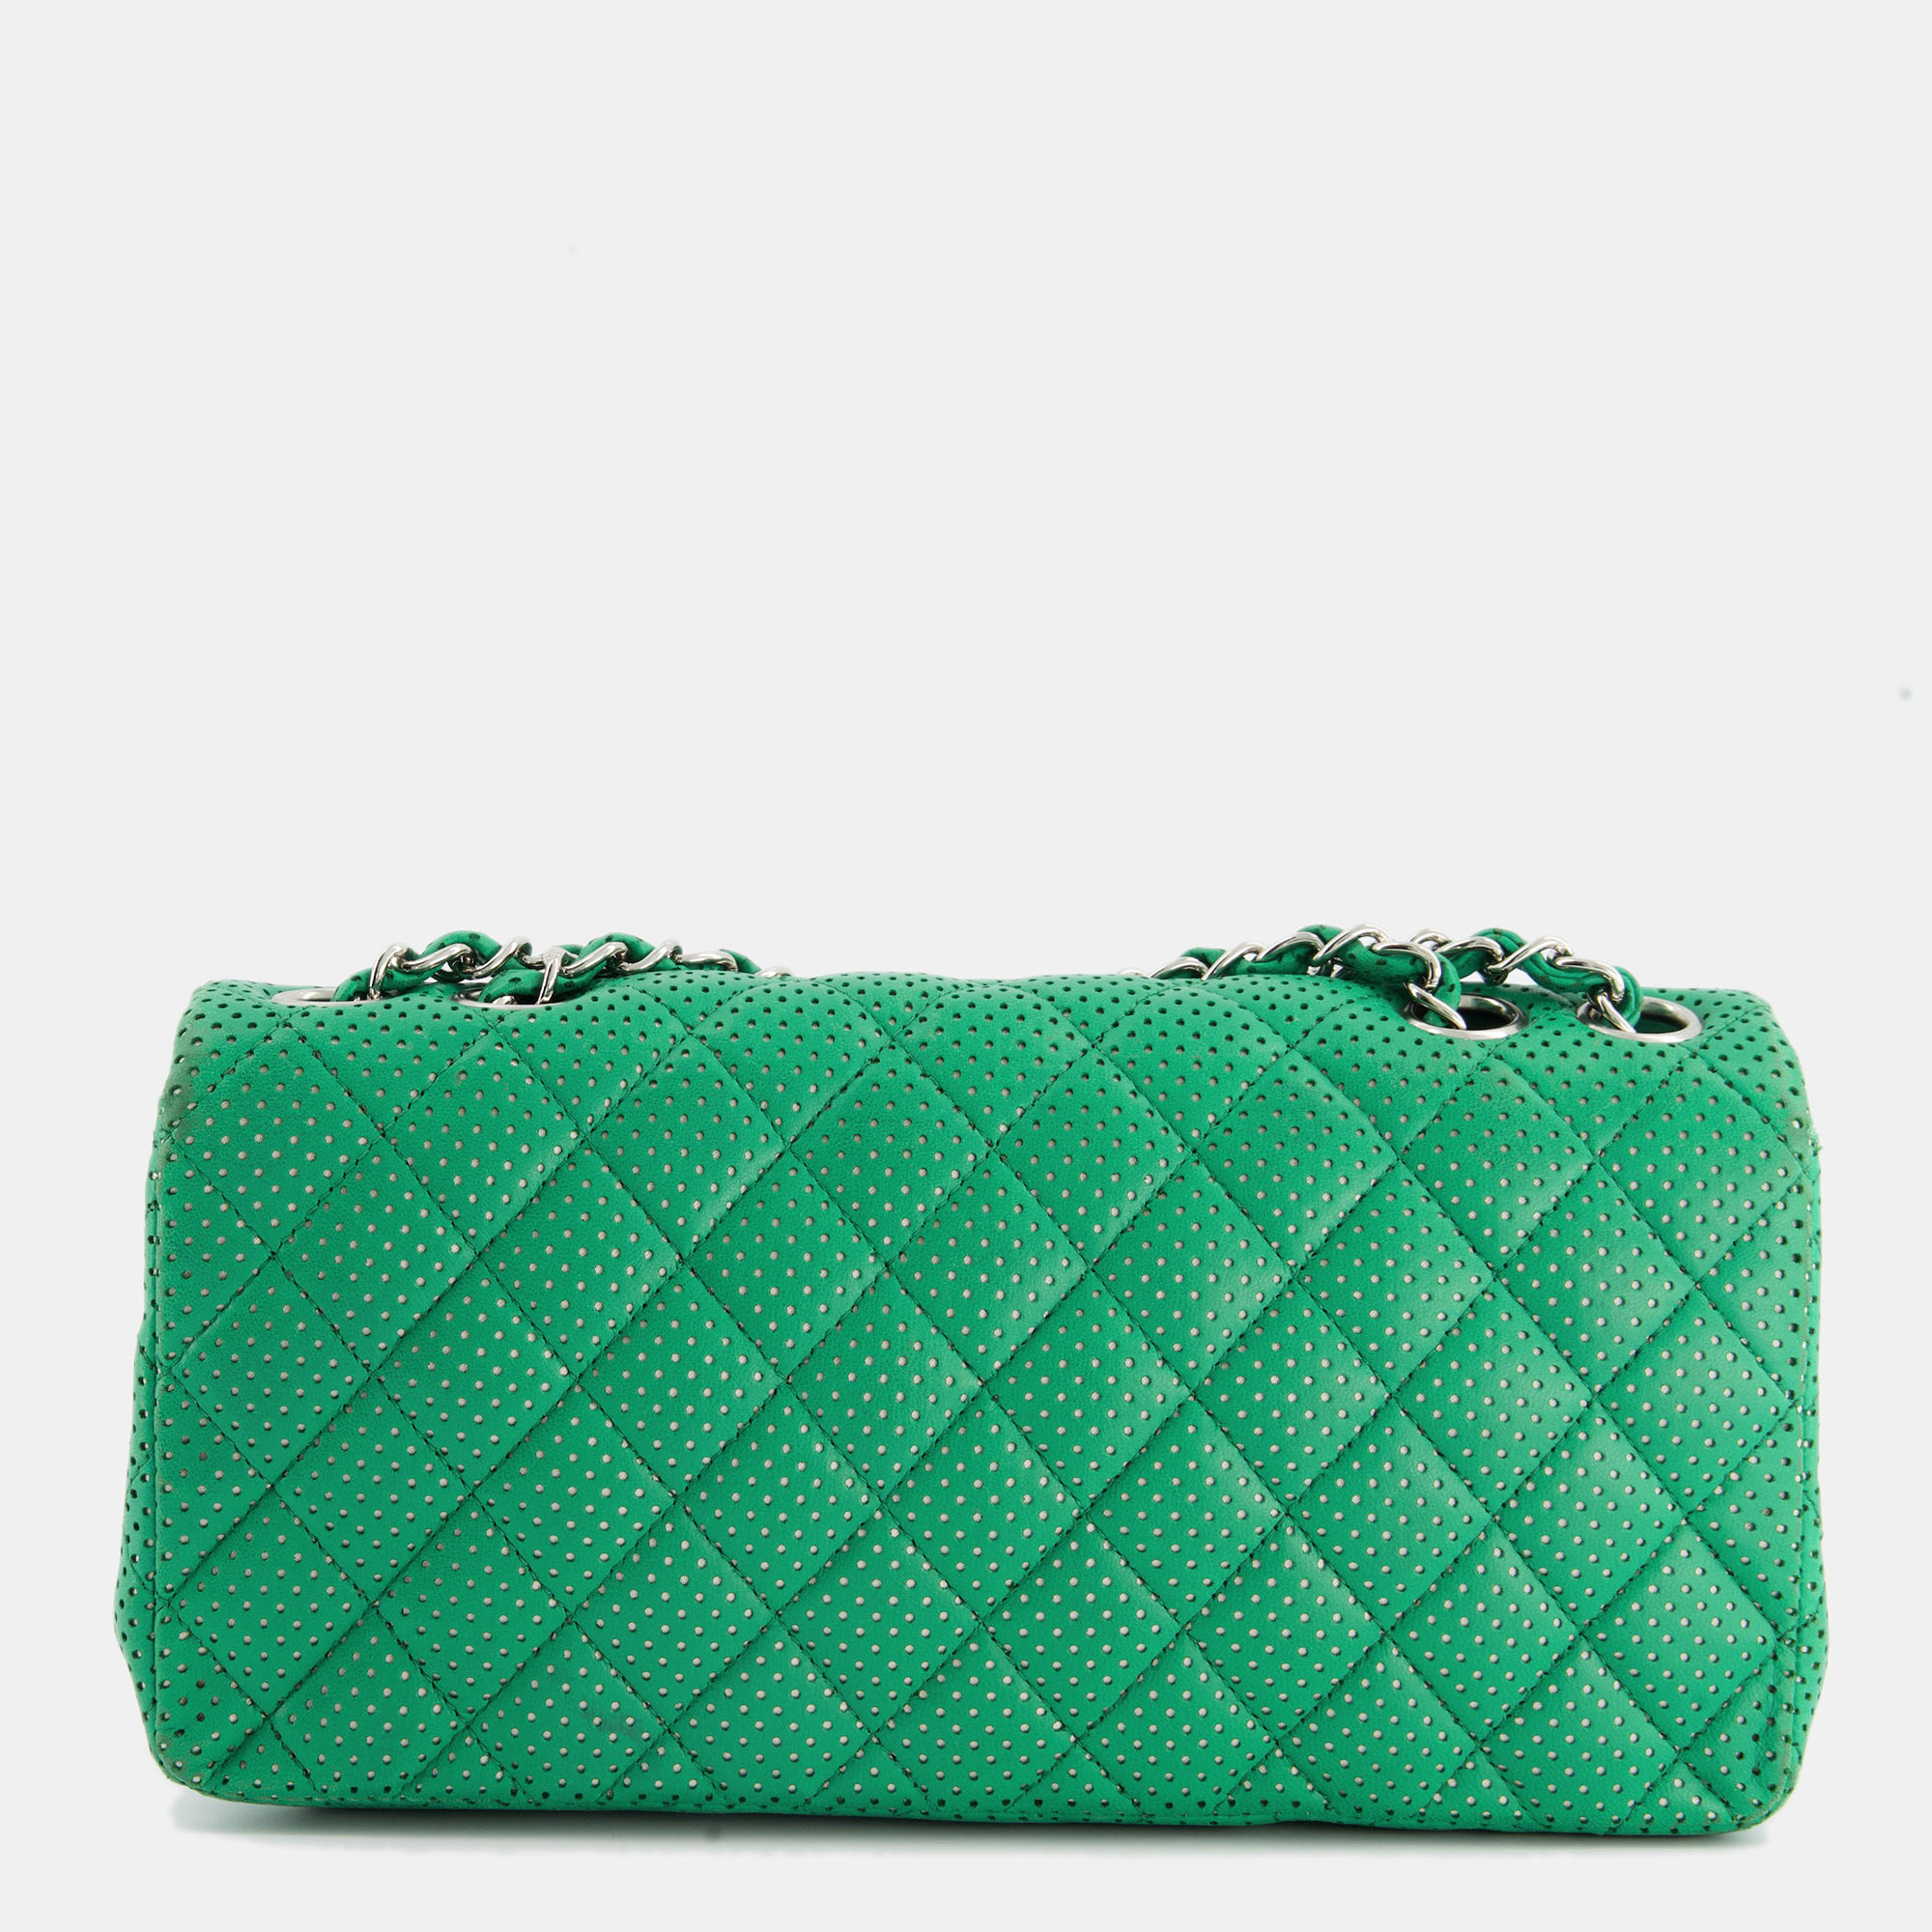 Chanel Green Perforated Lambskin Leather East West Flap Bag With Silver Hardware